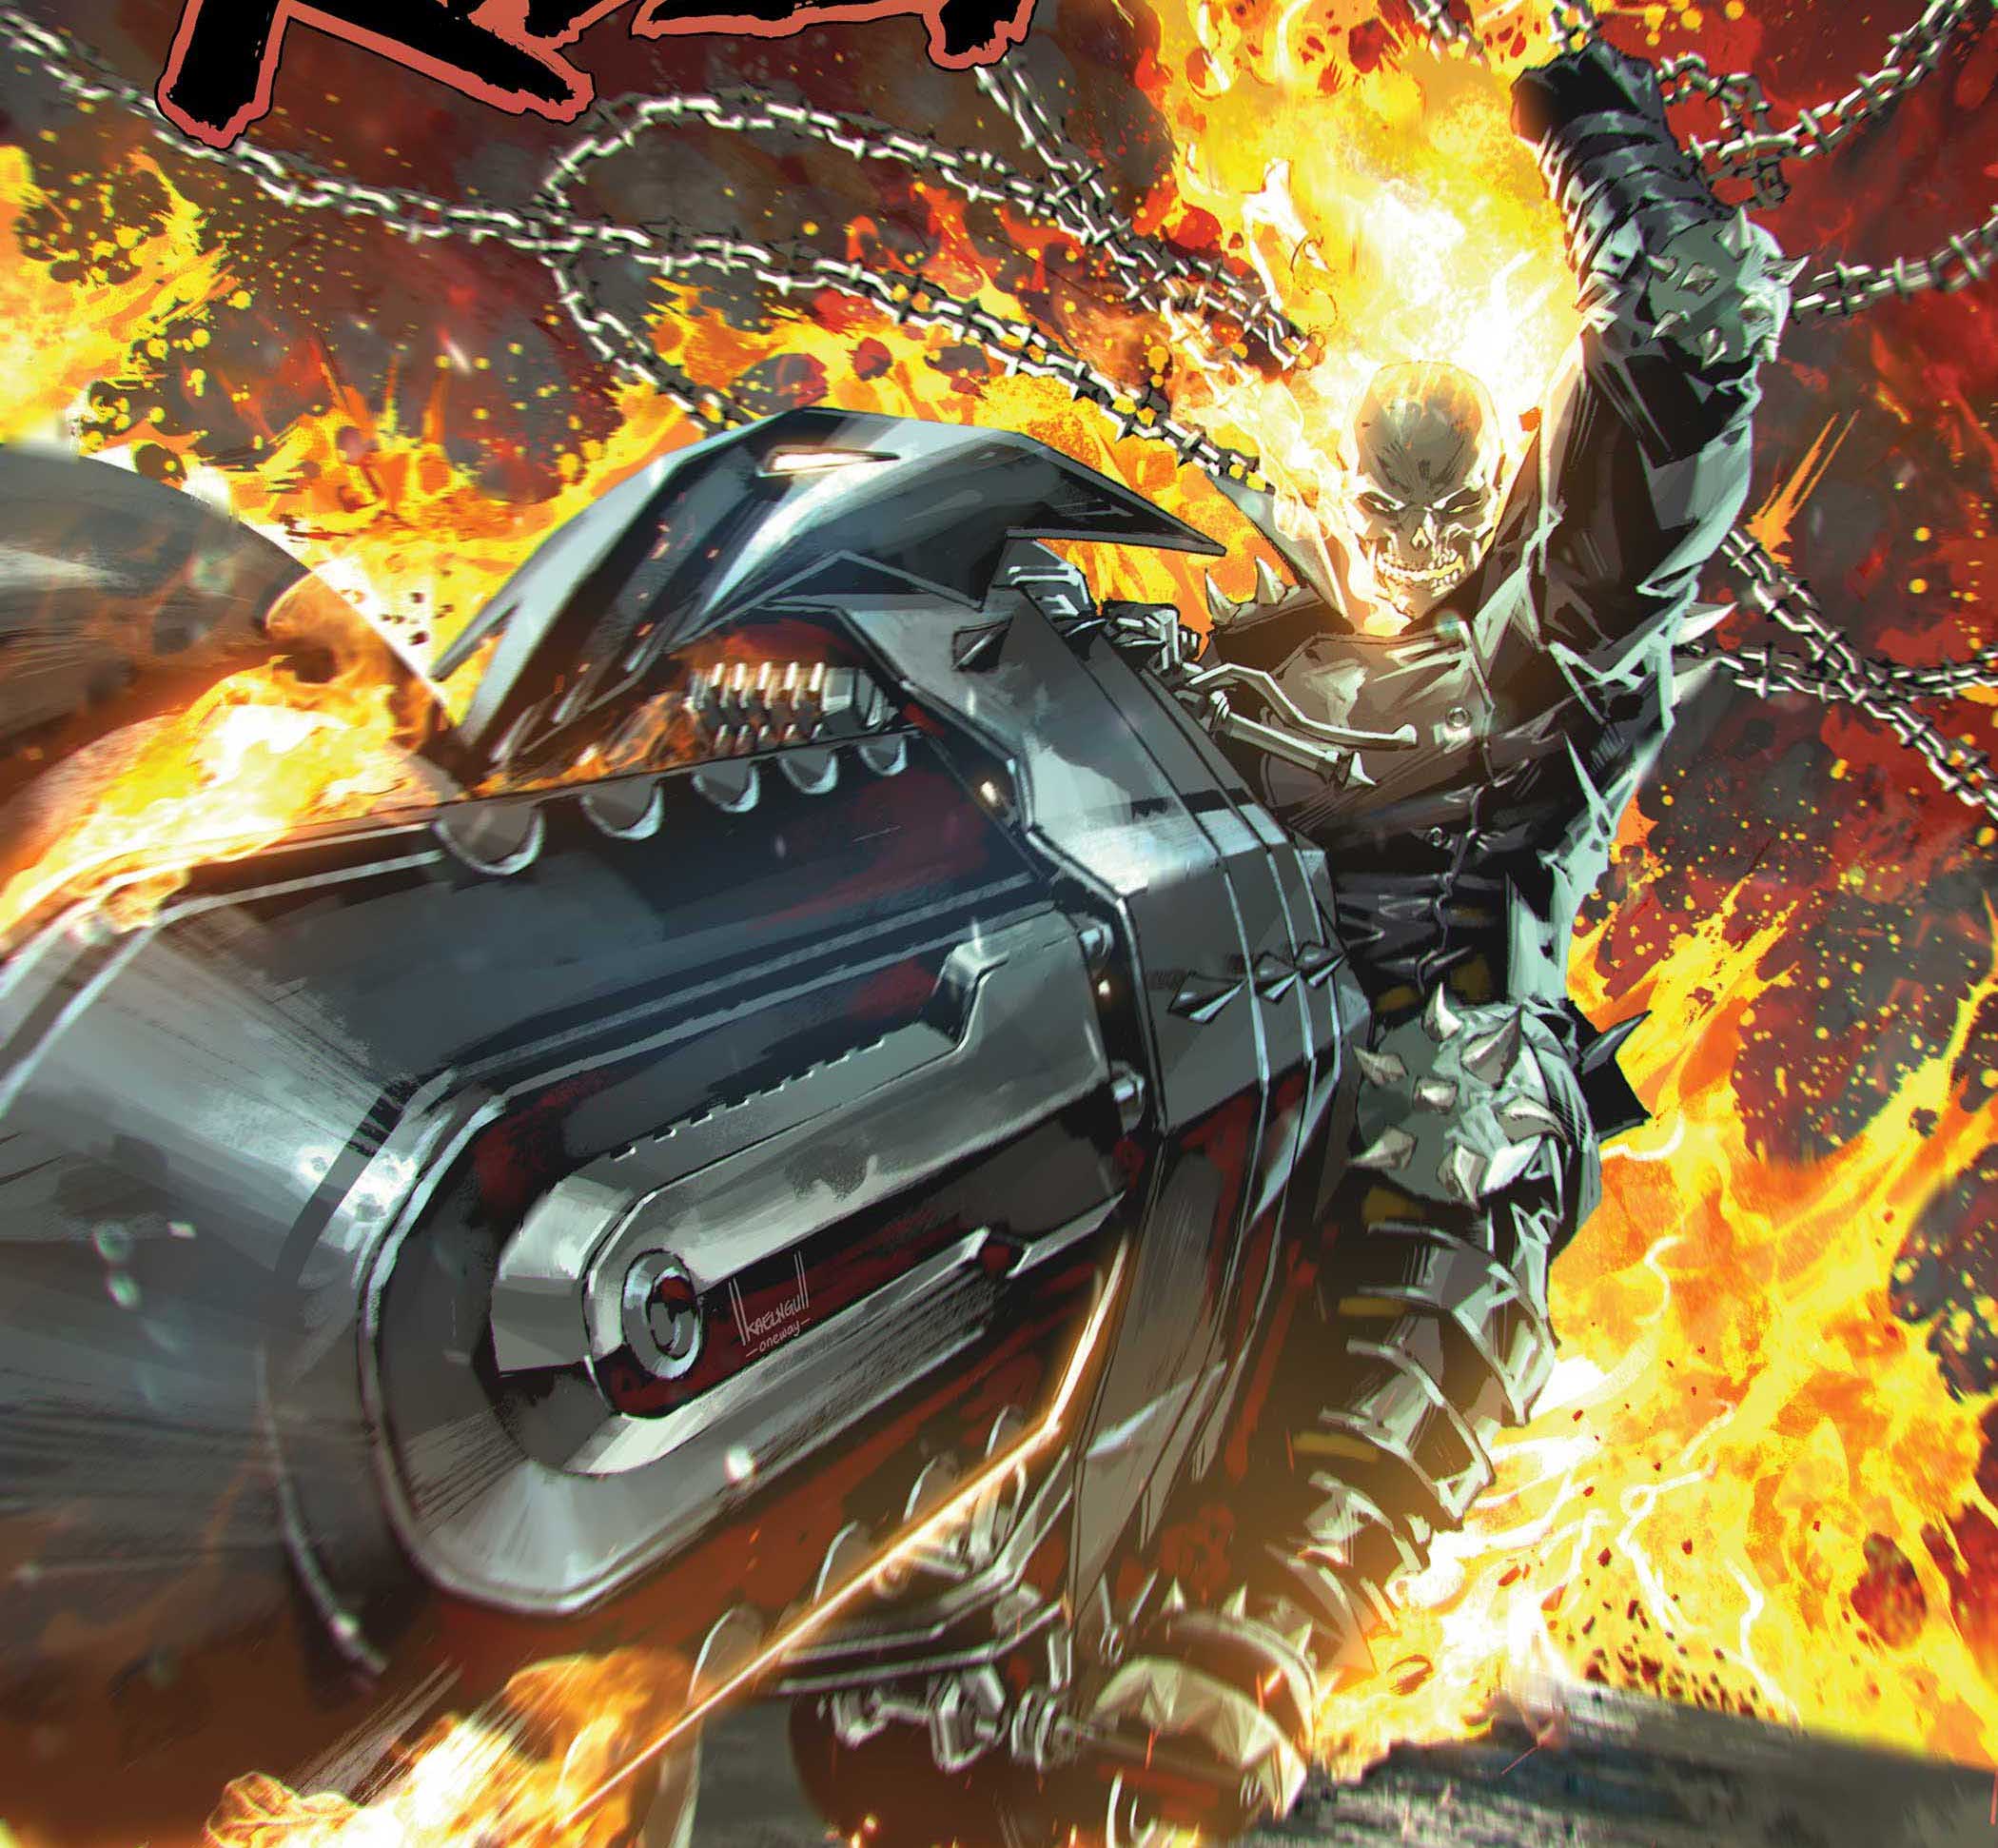 New 'Ghost Rider' #1 to launch February by Ben Percy & Cory Smith